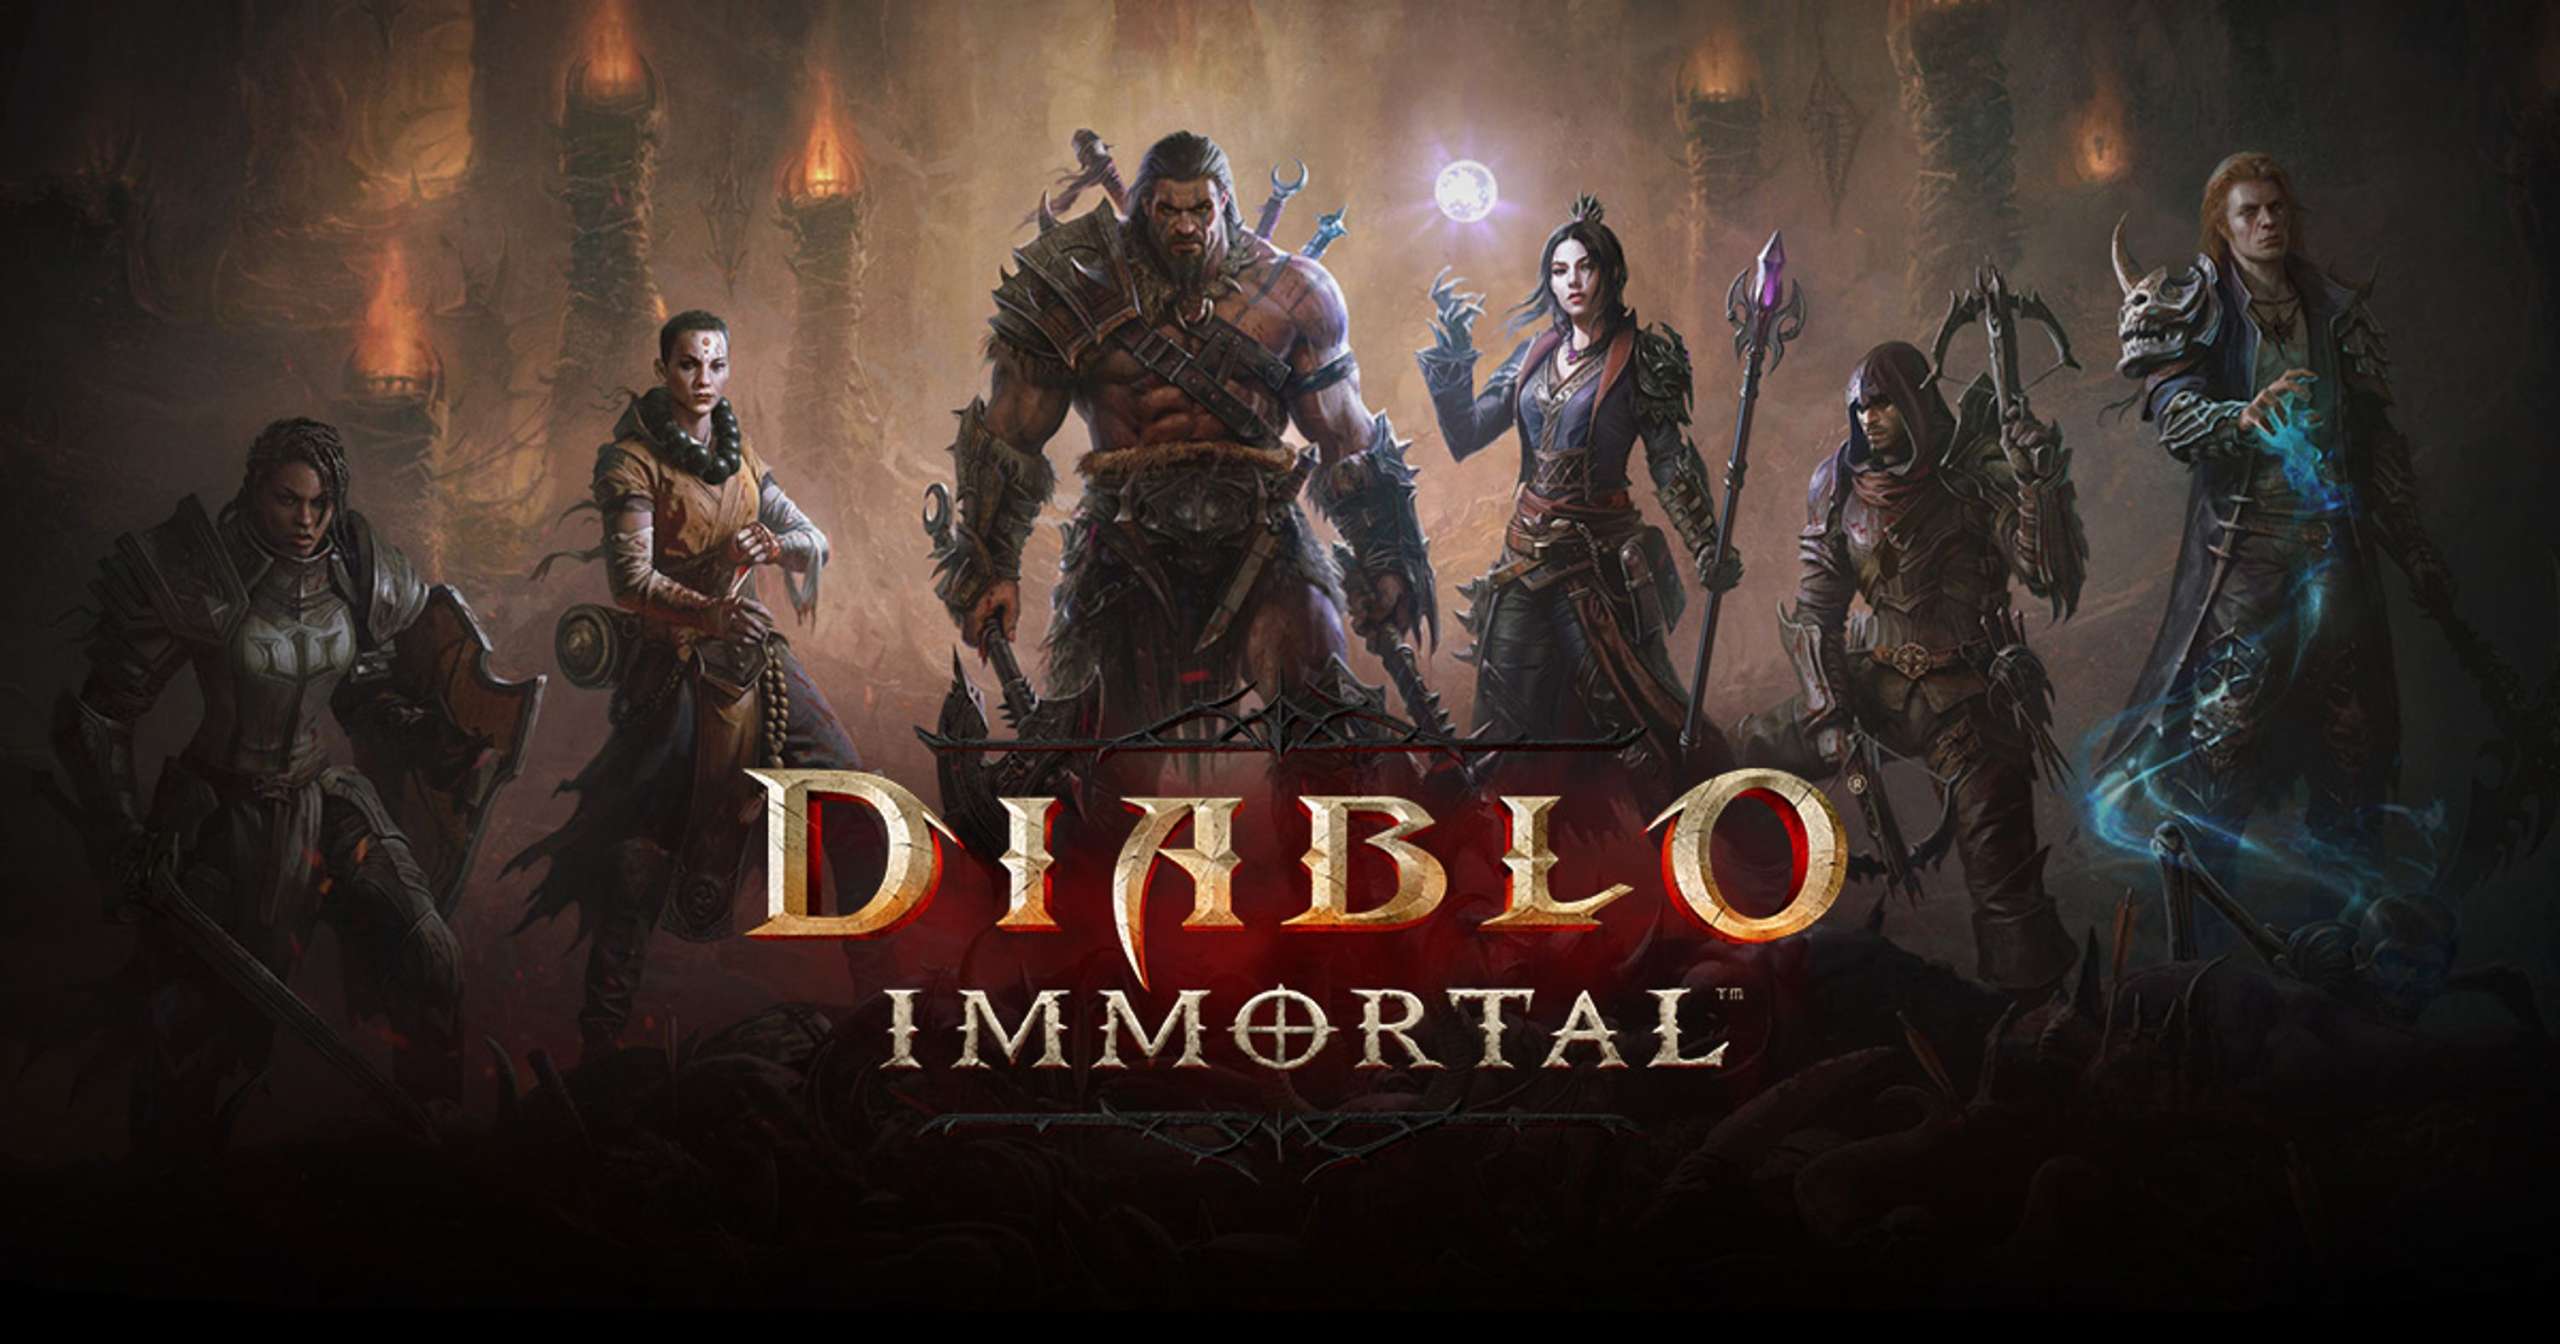 Every Two Weeks, According To Blizzard, We Will See The Release Of New Diablo Immortal Content